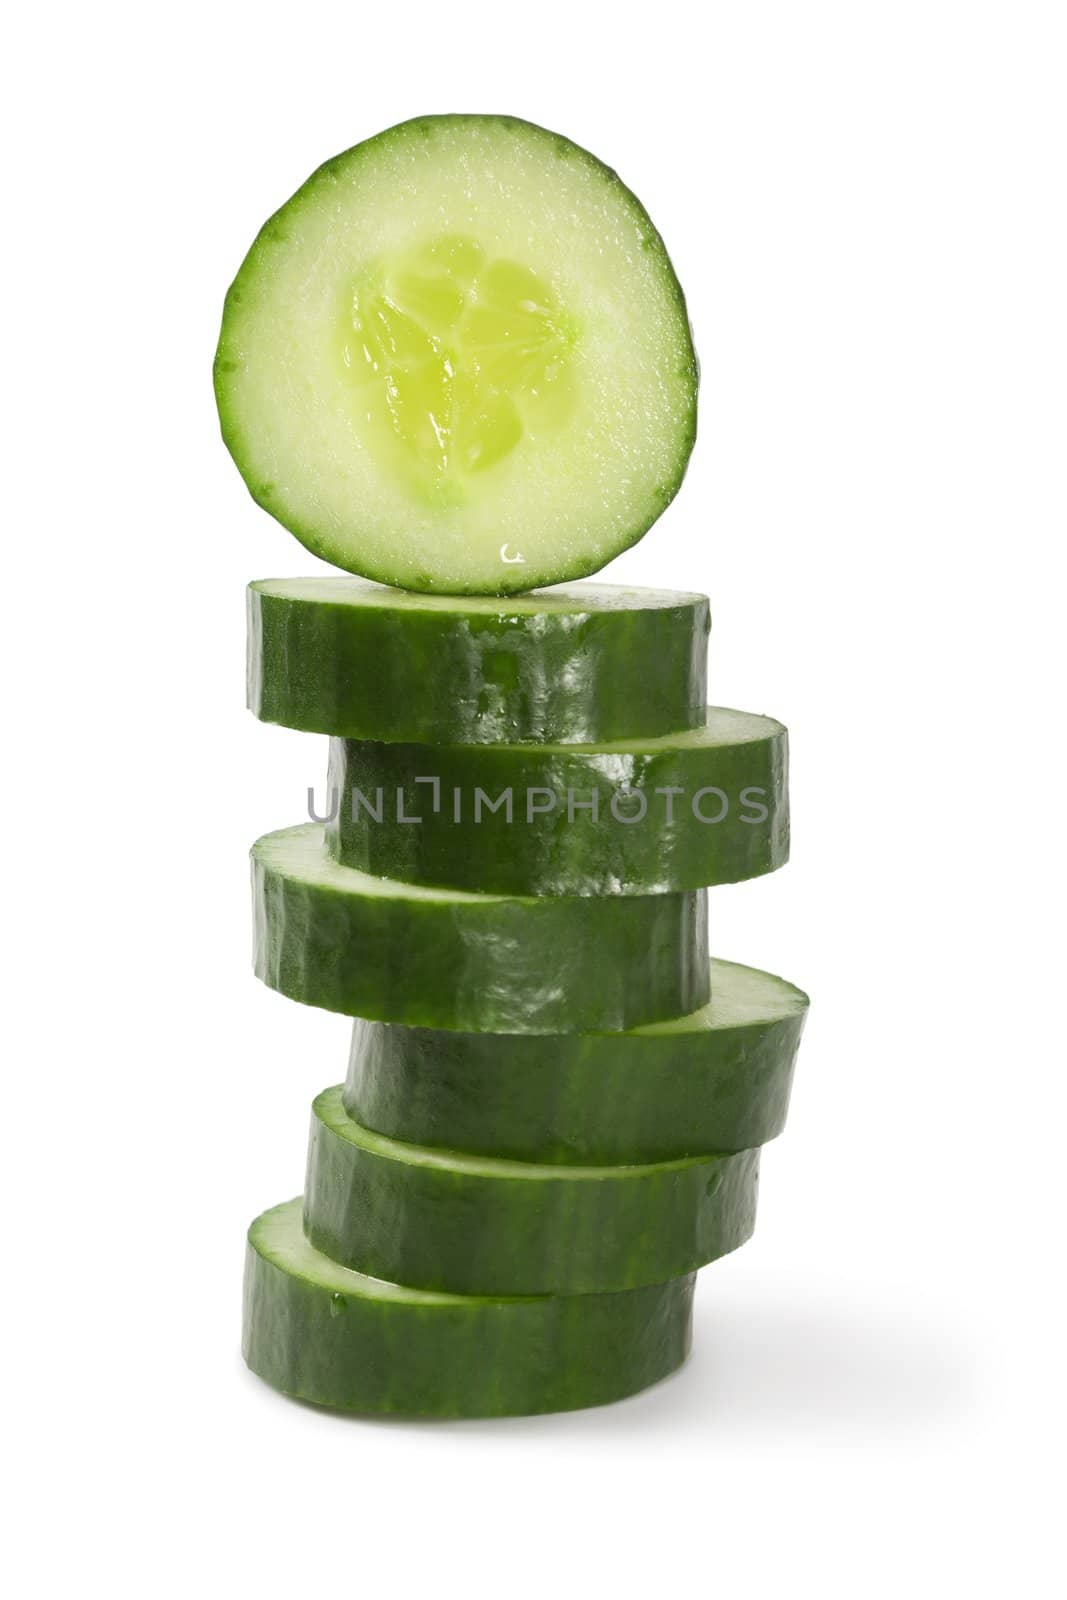 Photo of a cucumber cut into thick slices and stacked over a white background.
